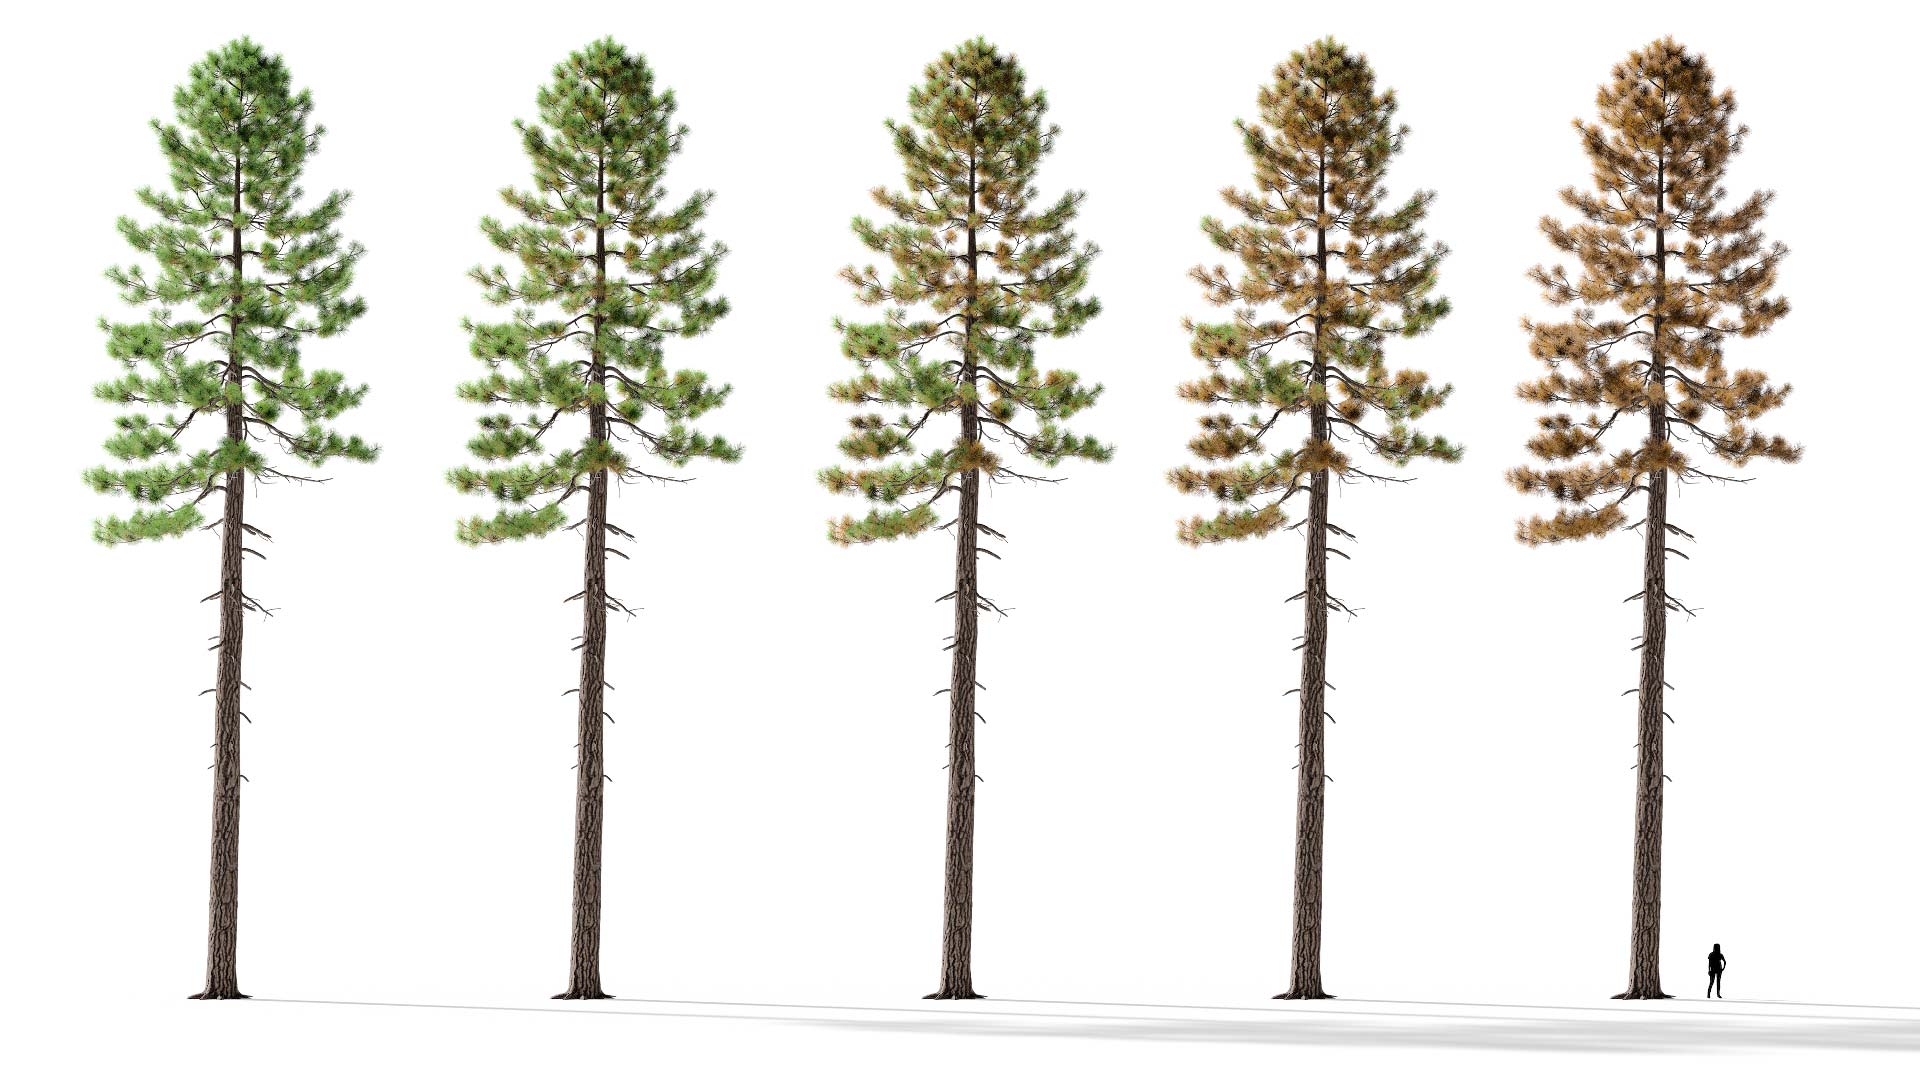 3D model of the Jeffrey pine forest Pinus jeffreyi forest health variations